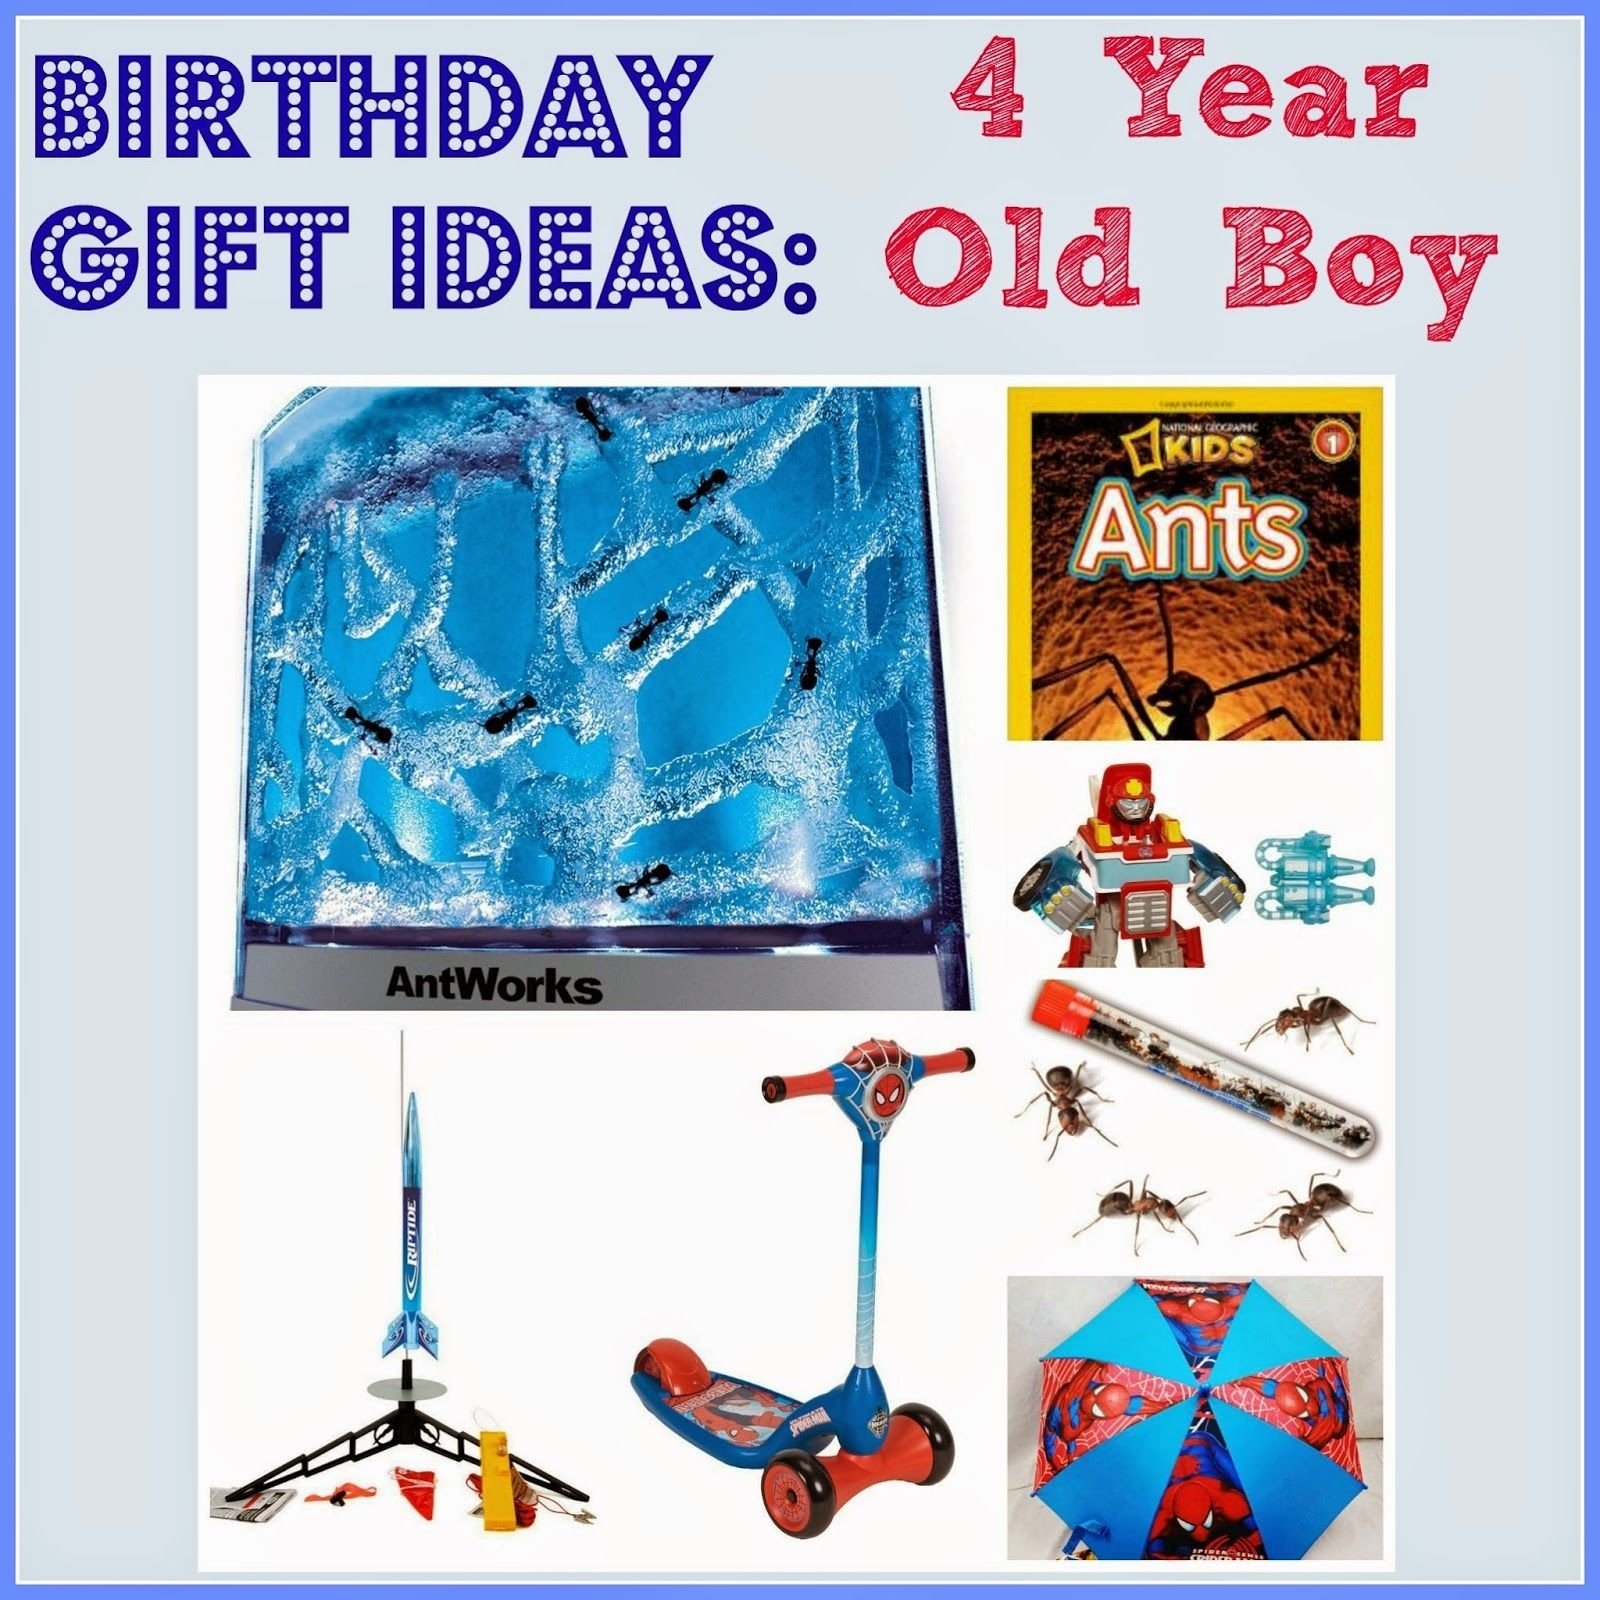 10 Lovable 4 Year Old Birthday Gift Ideas jude is turning 4 birthday ideas judeturns4 birthdays 5 2022